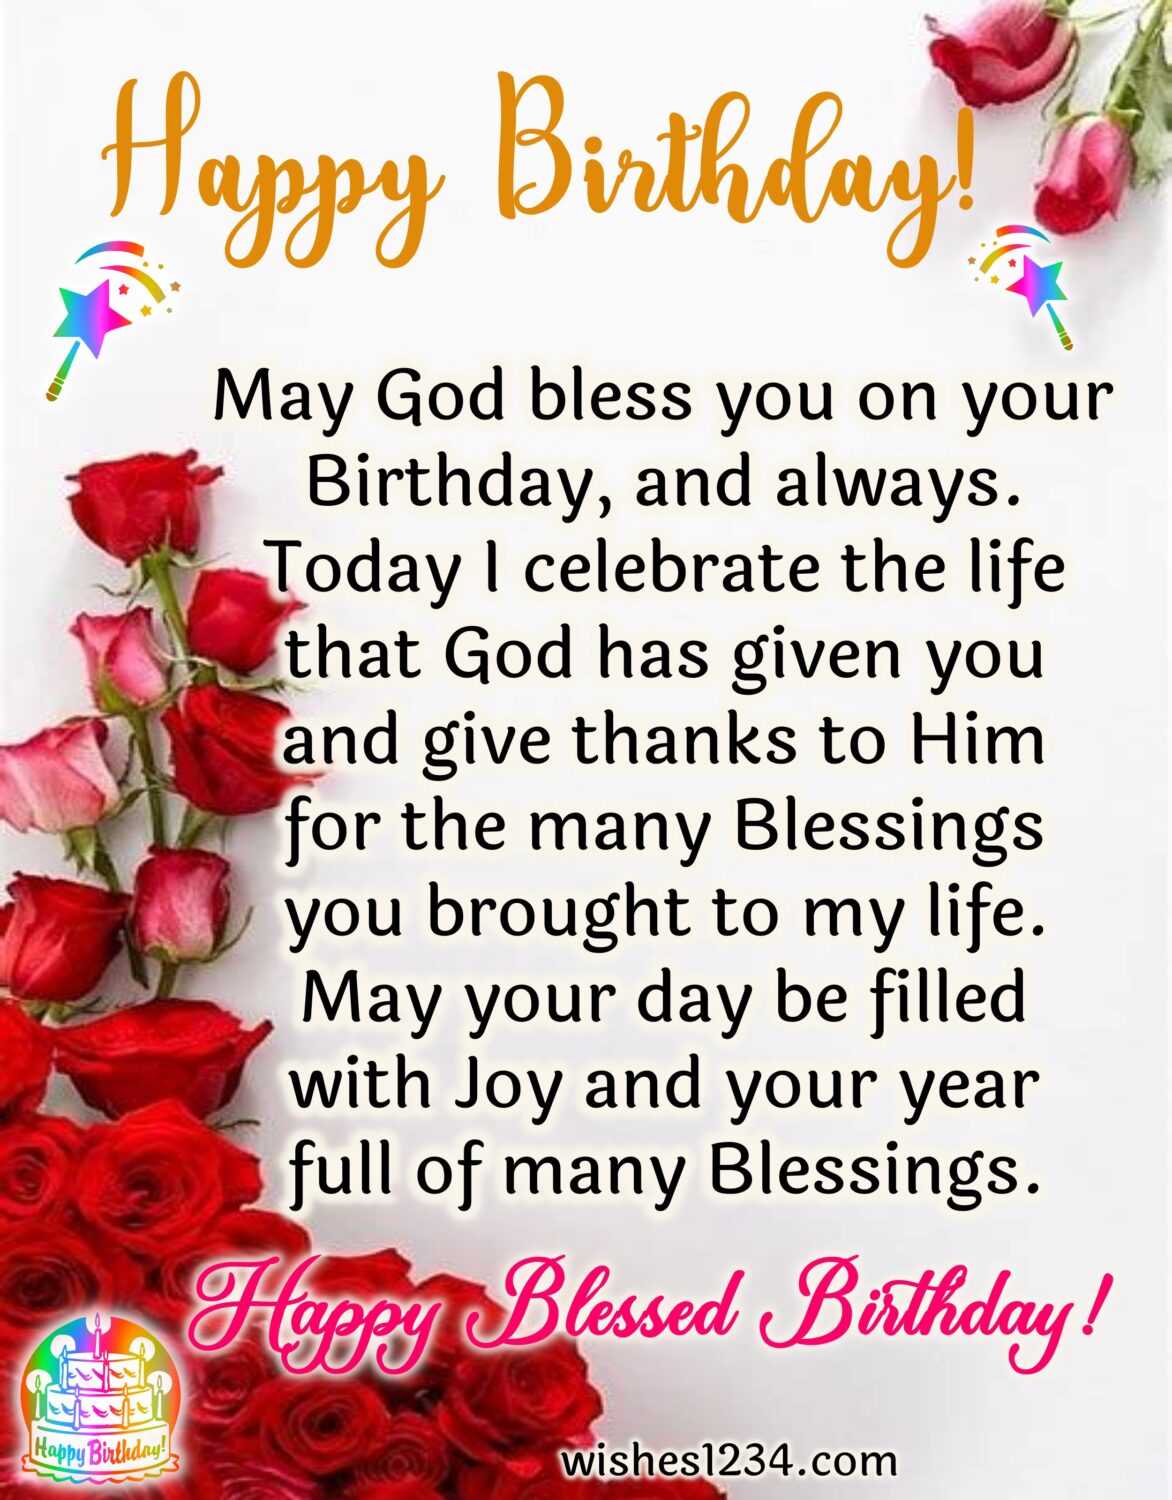 Happy birthday sister blessings with red rose flowers background, Birthday Wishes for Younger Sister.